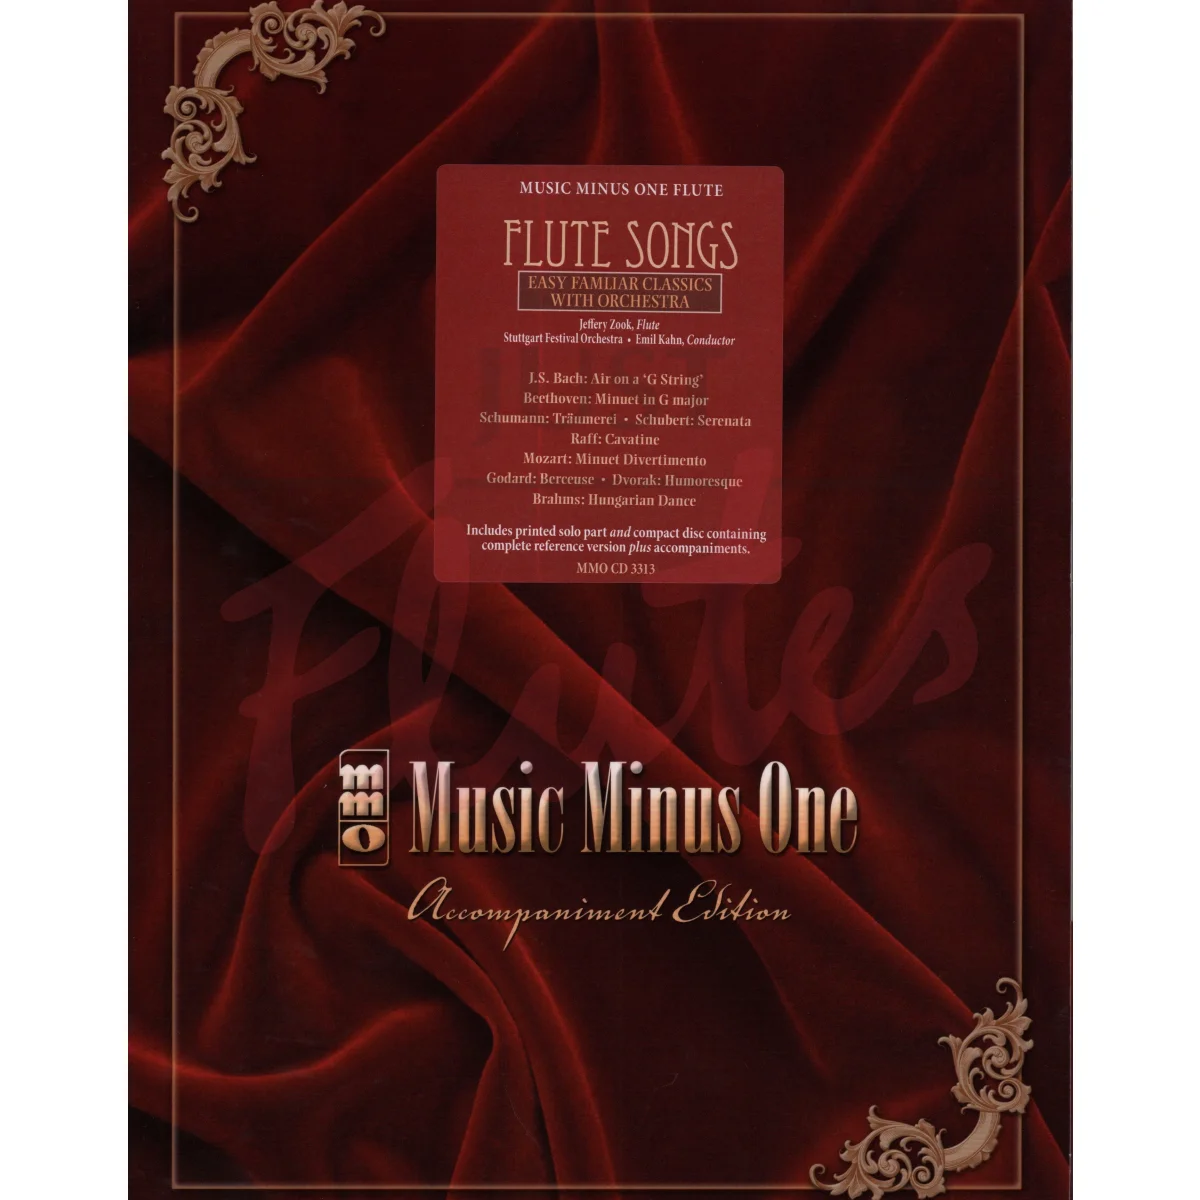 Flute Songs: Easy Familiar Classics with Orchestra